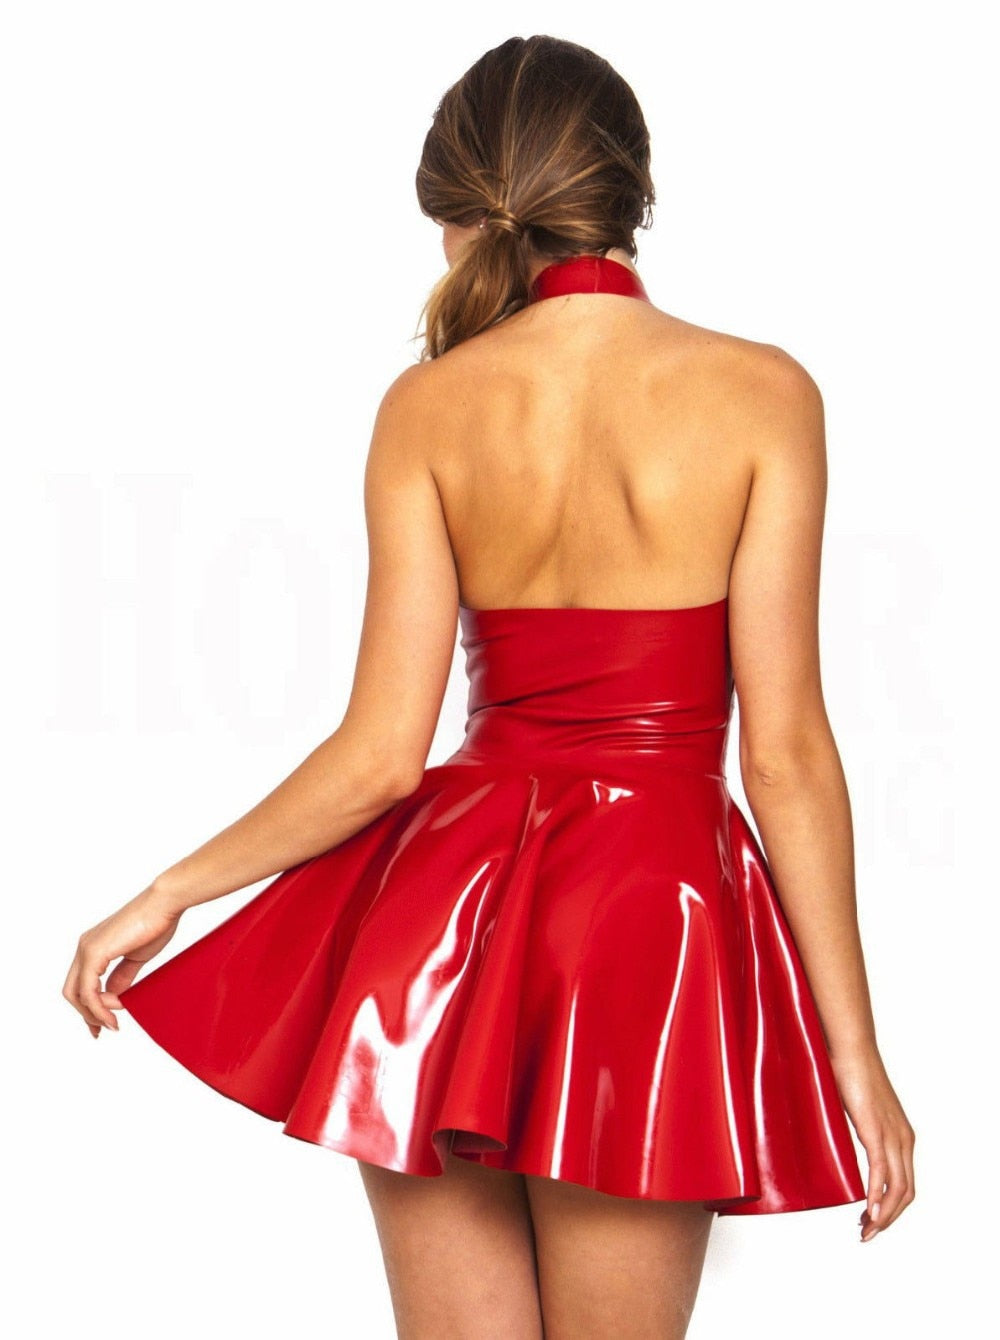 Summer Dress for Women Black Red PVC Imitation Leather Dress Patent Leather Skirt Novelty Cosplay Costume The Clothing Company Sydney